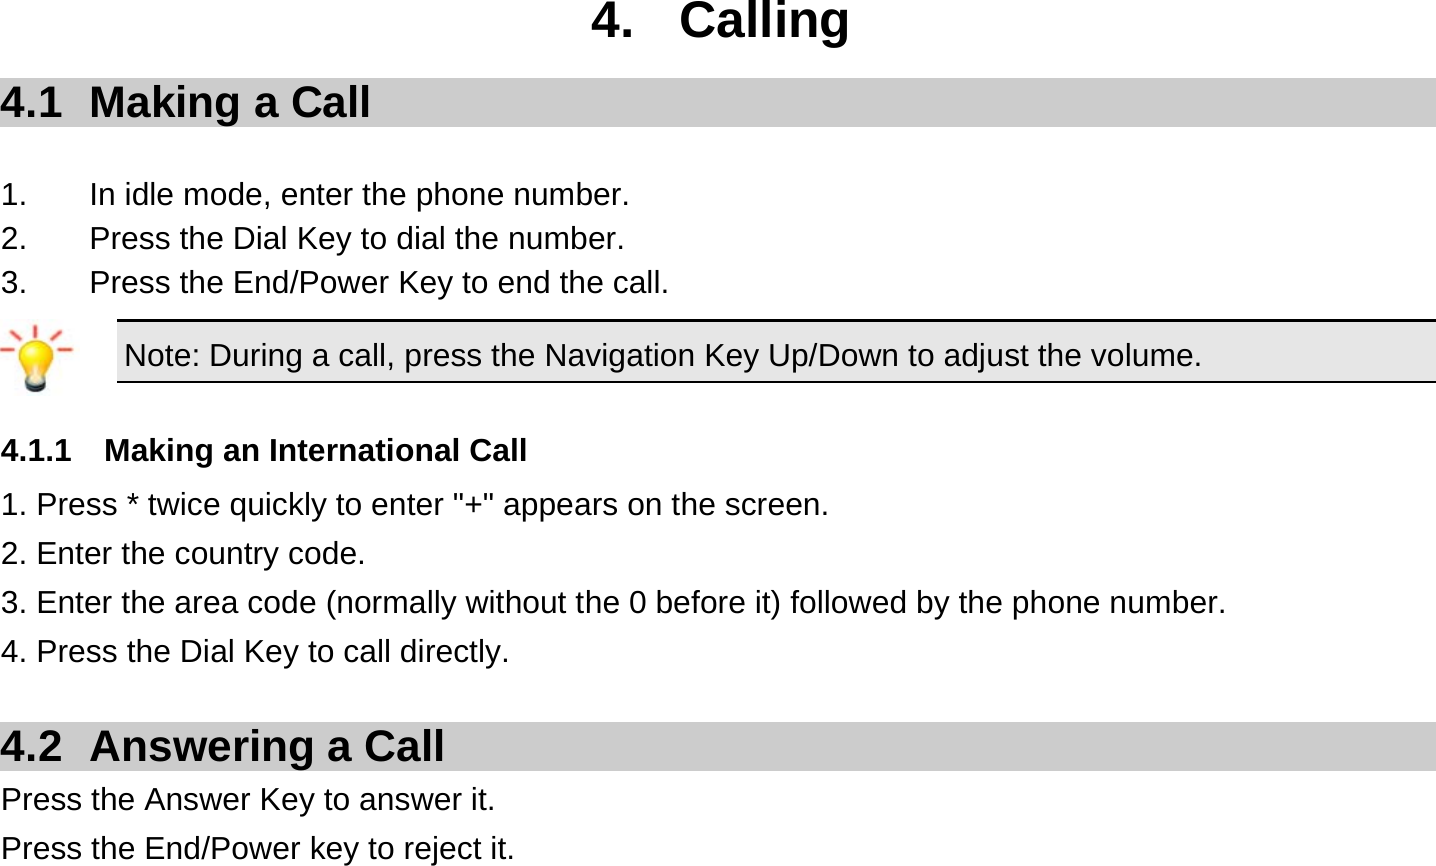 4. Calling 4.1  Making a Call  1.  In idle mode, enter the phone number. 2.  Press the Dial Key to dial the number. 3.  Press the End/Power Key to end the call. Note: During a call, press the Navigation Key Up/Down to adjust the volume.  4.1.1  Making an International Call 1. Press * twice quickly to enter &quot;+&quot; appears on the screen. 2. Enter the country code. 3. Enter the area code (normally without the 0 before it) followed by the phone number. 4. Press the Dial Key to call directly.  4.2 Answering a Call Press the Answer Key to answer it. Press the End/Power key to reject it.  